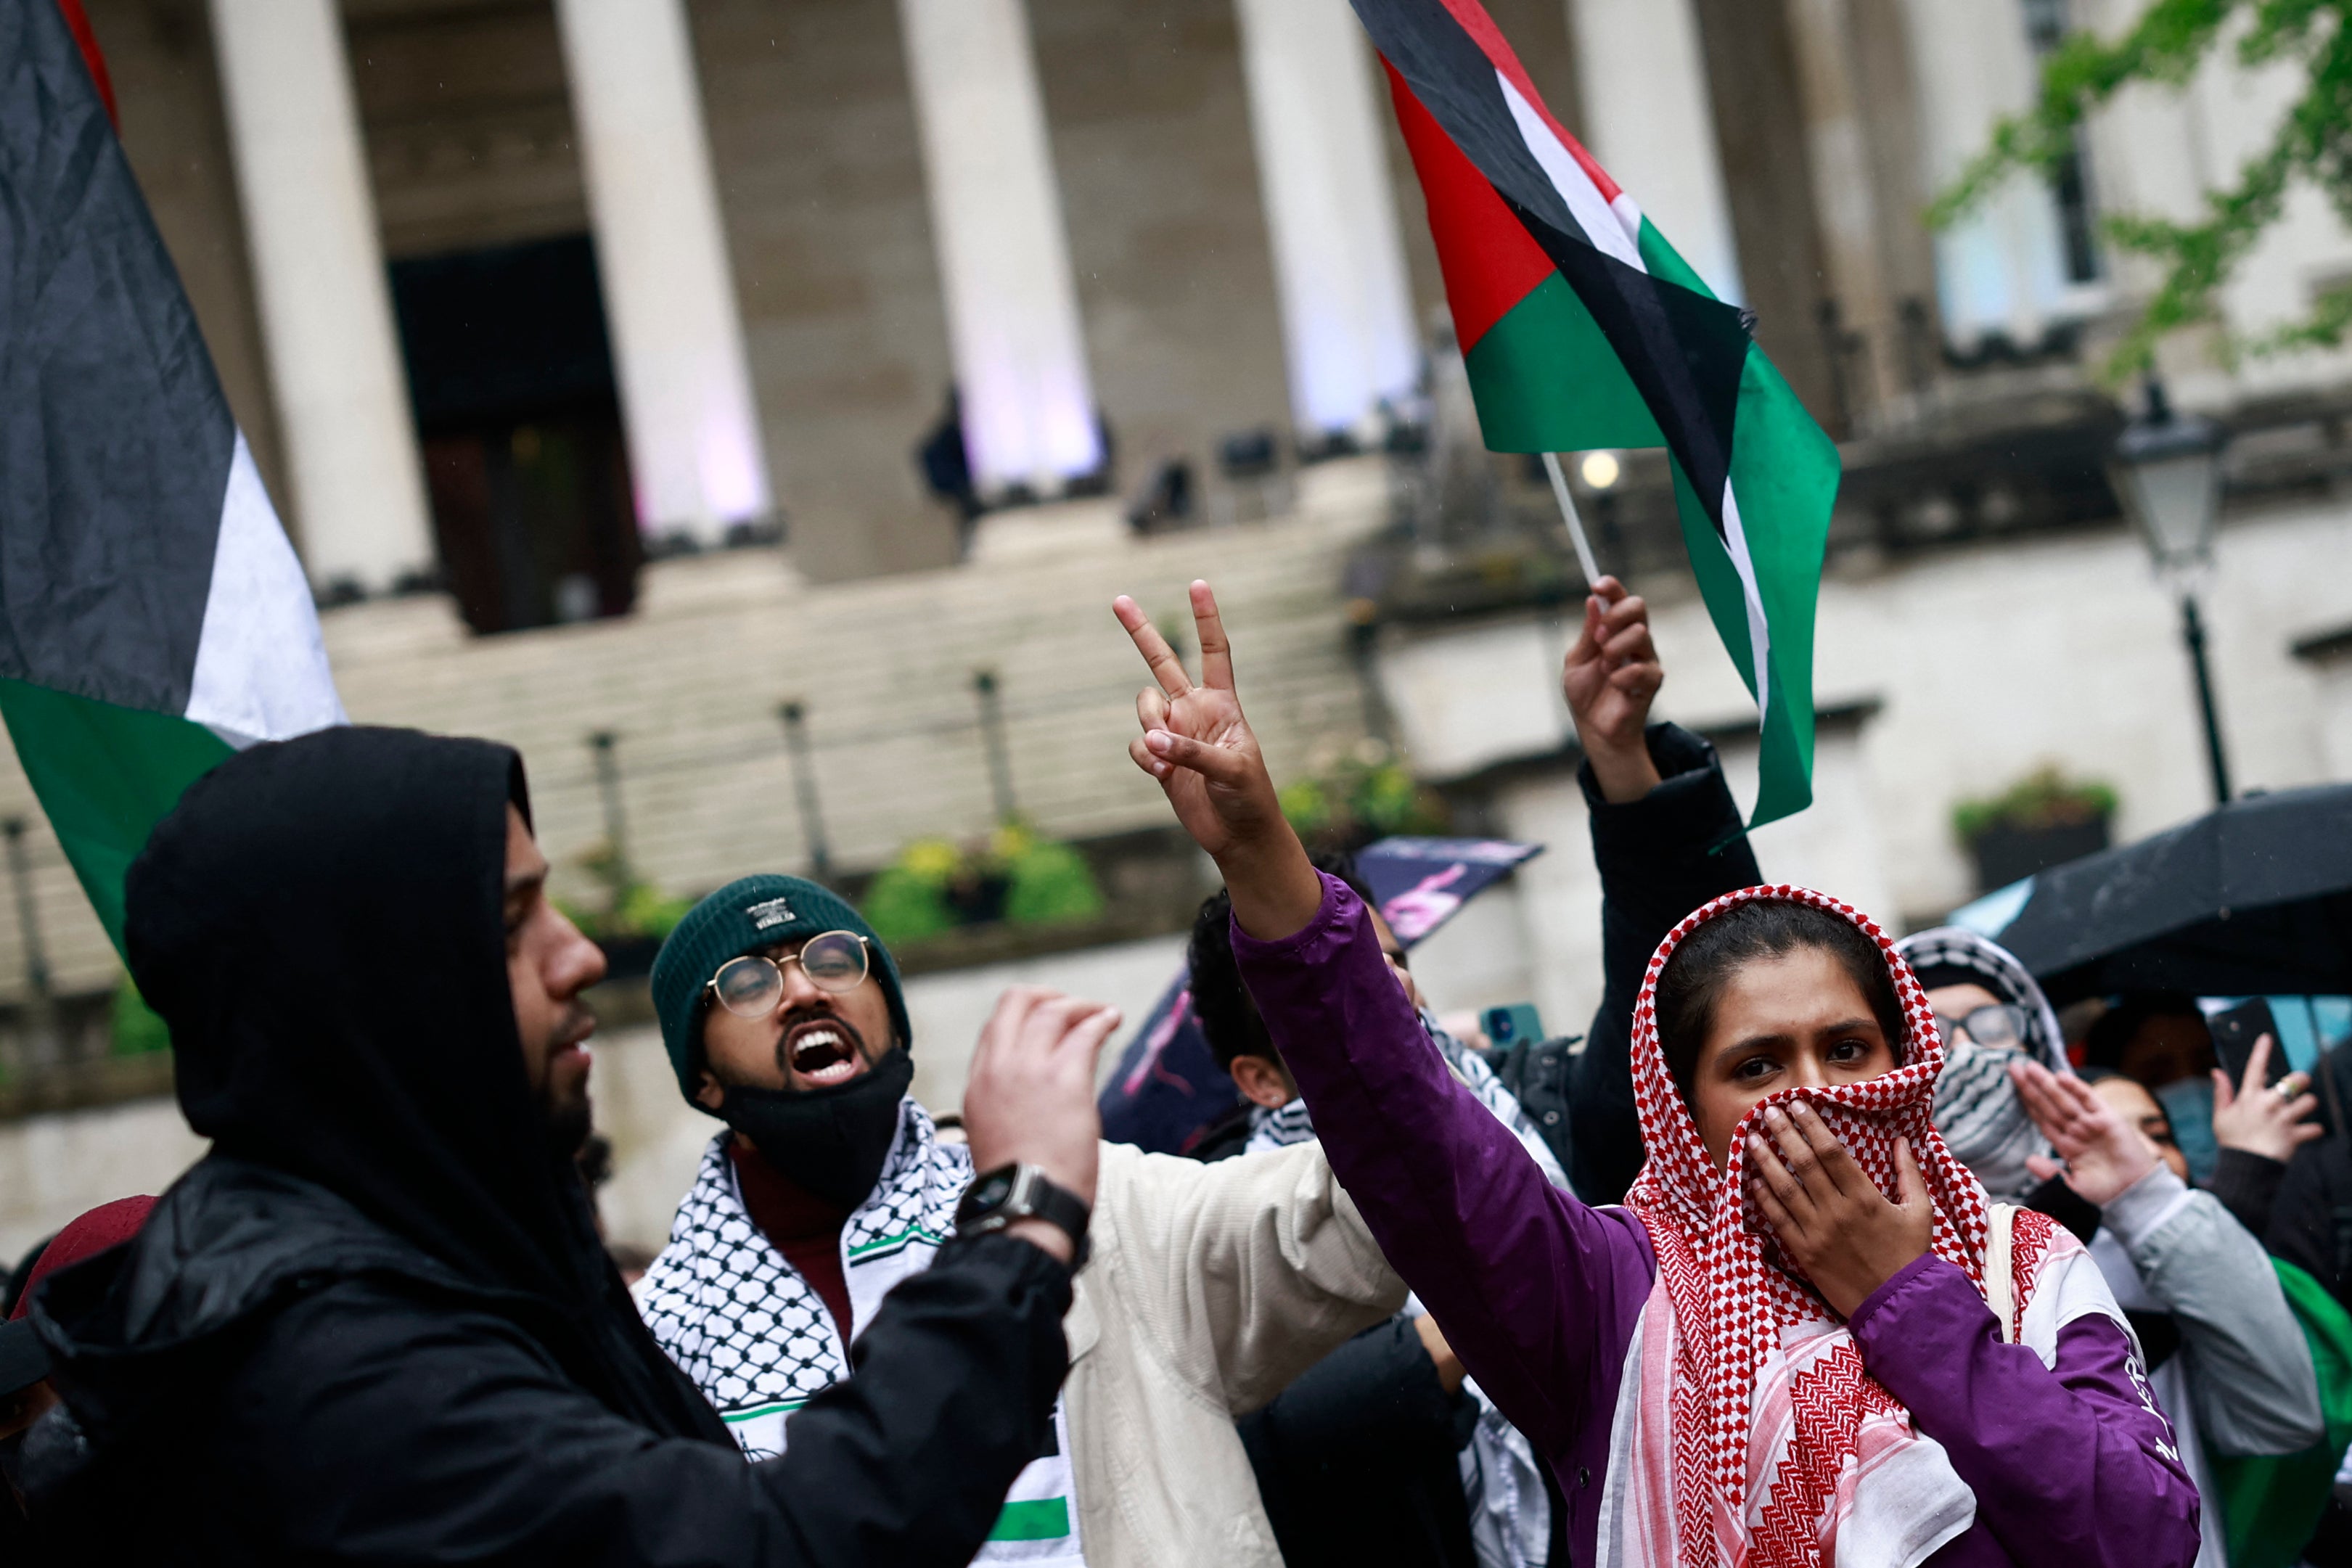 Students waving the Palestinian flag take part in a demonstration in support to Palestinian people at University College London